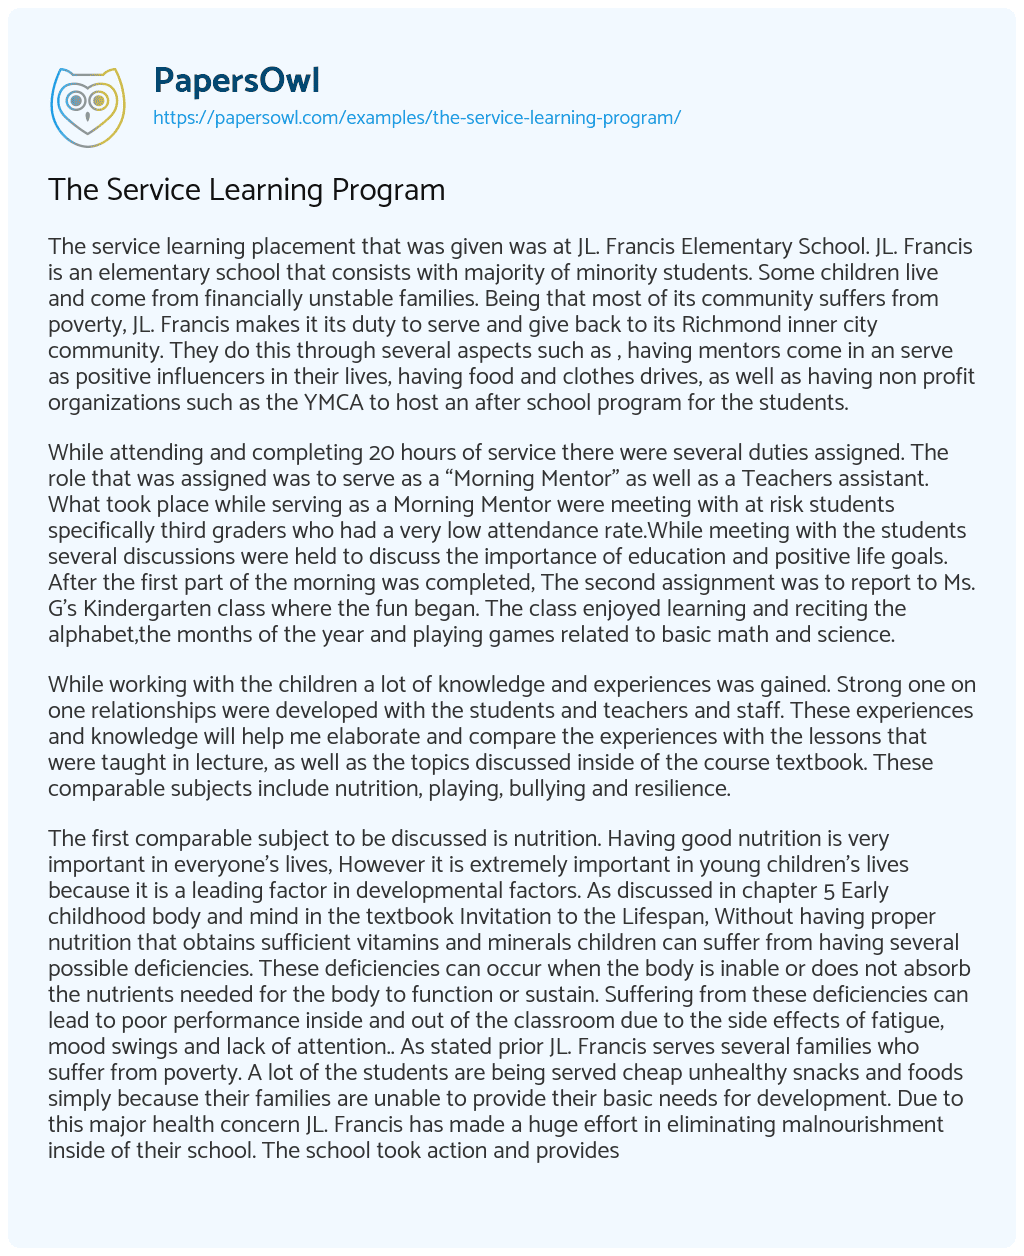 Essay on The Service Learning Program